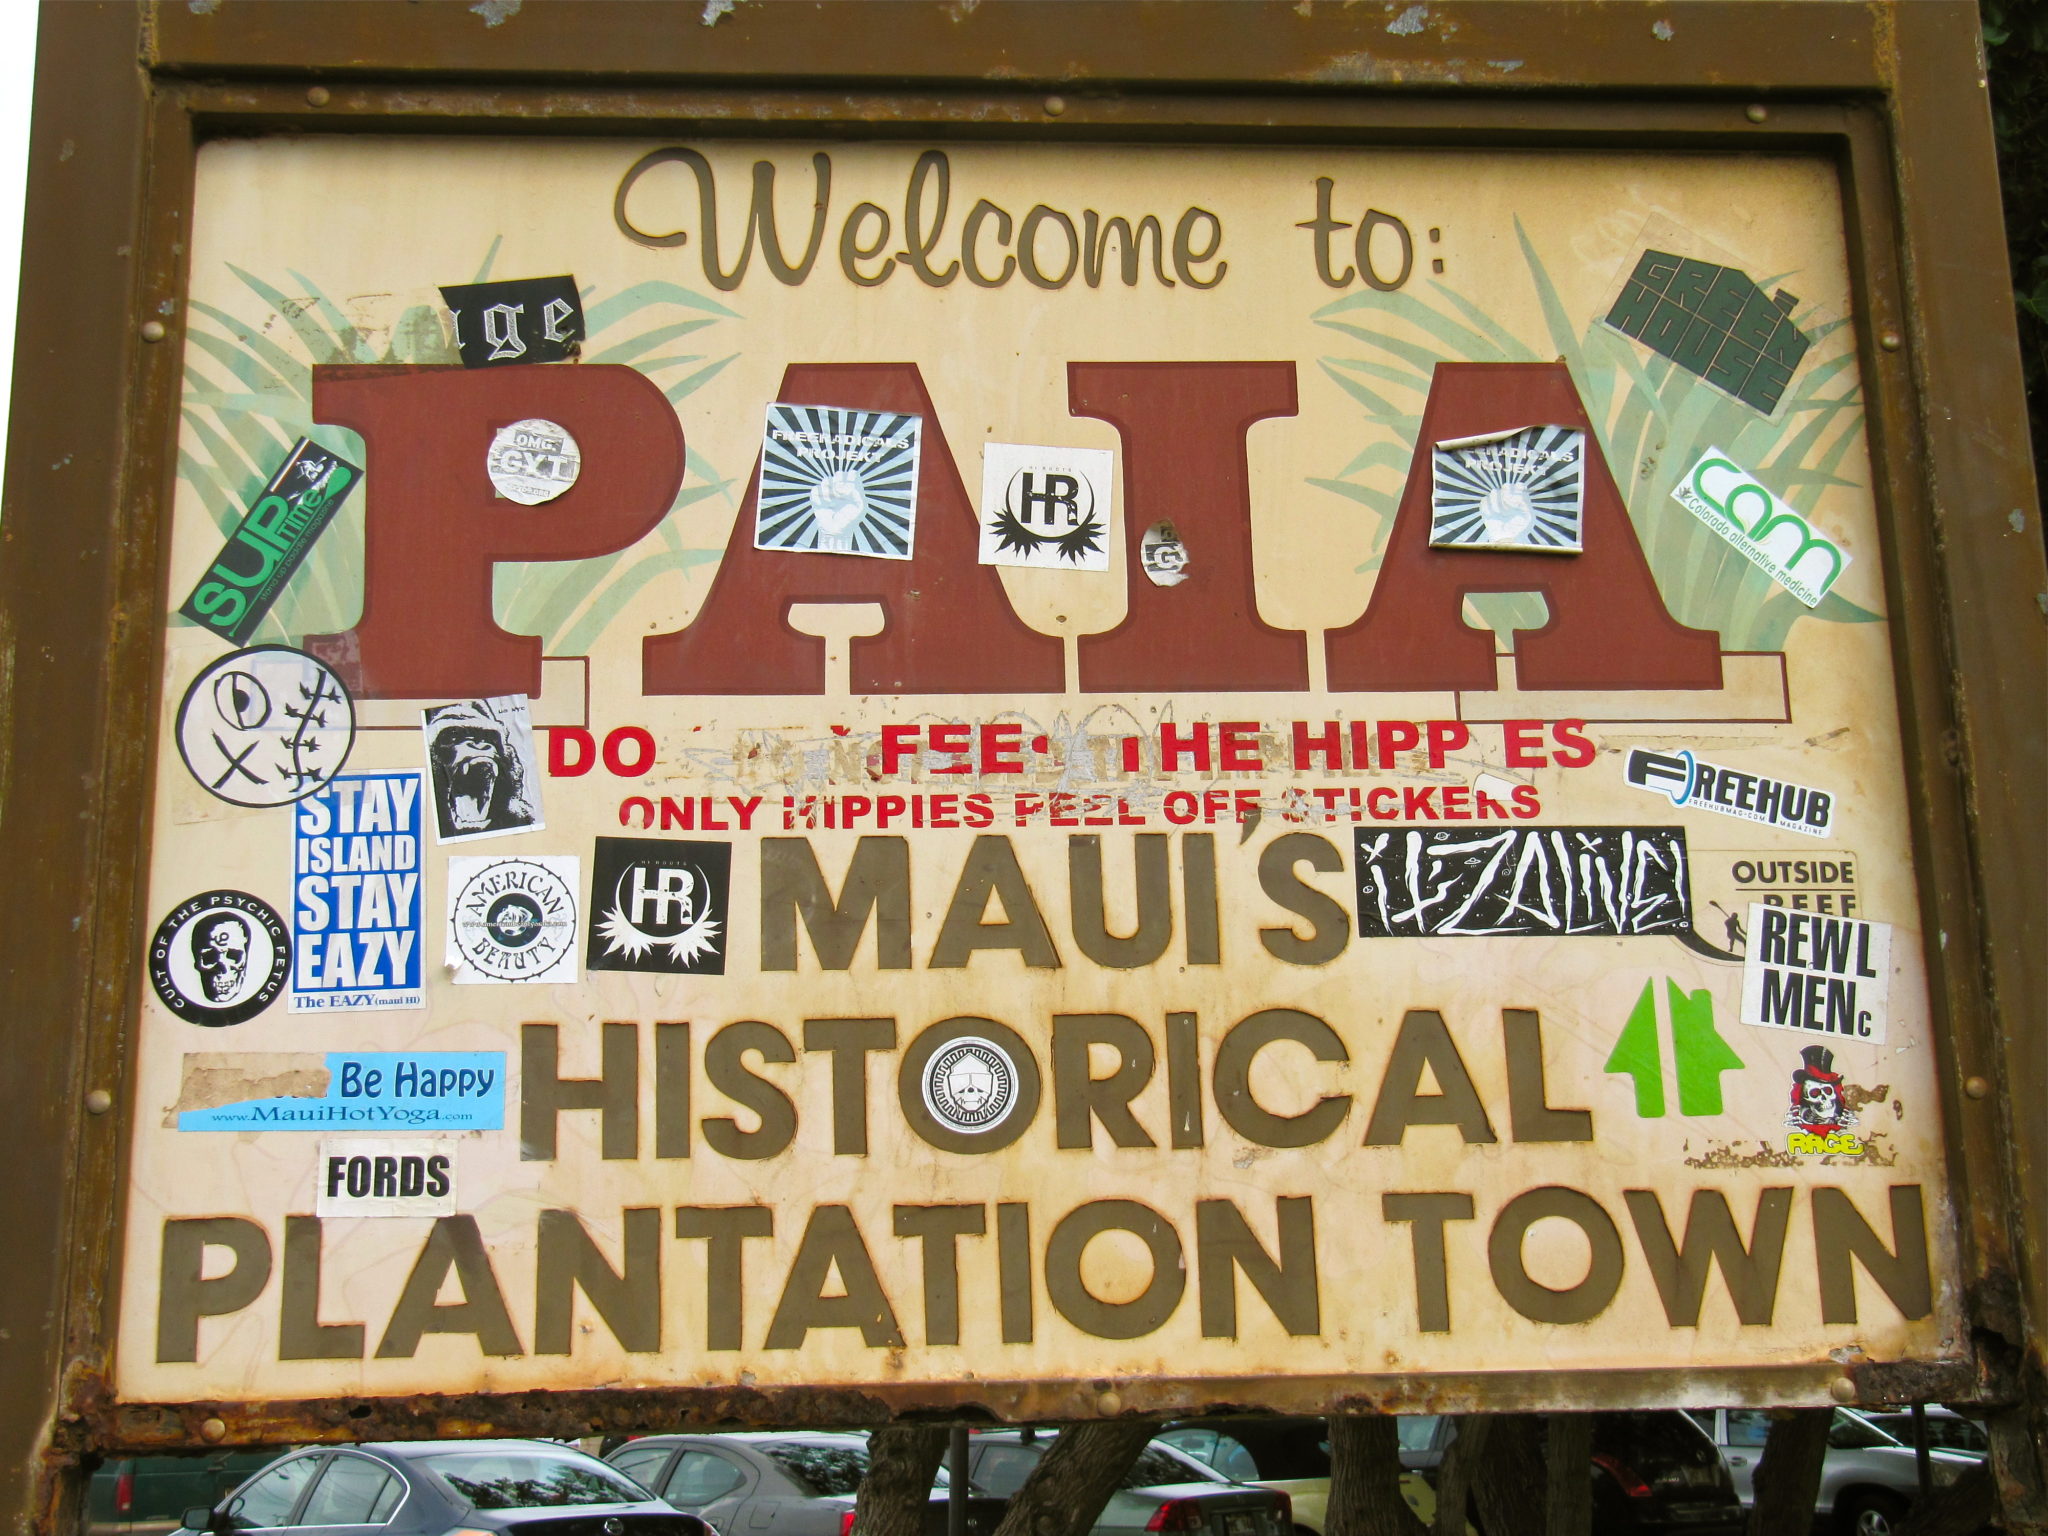 Paia, don't feed the hippies here.